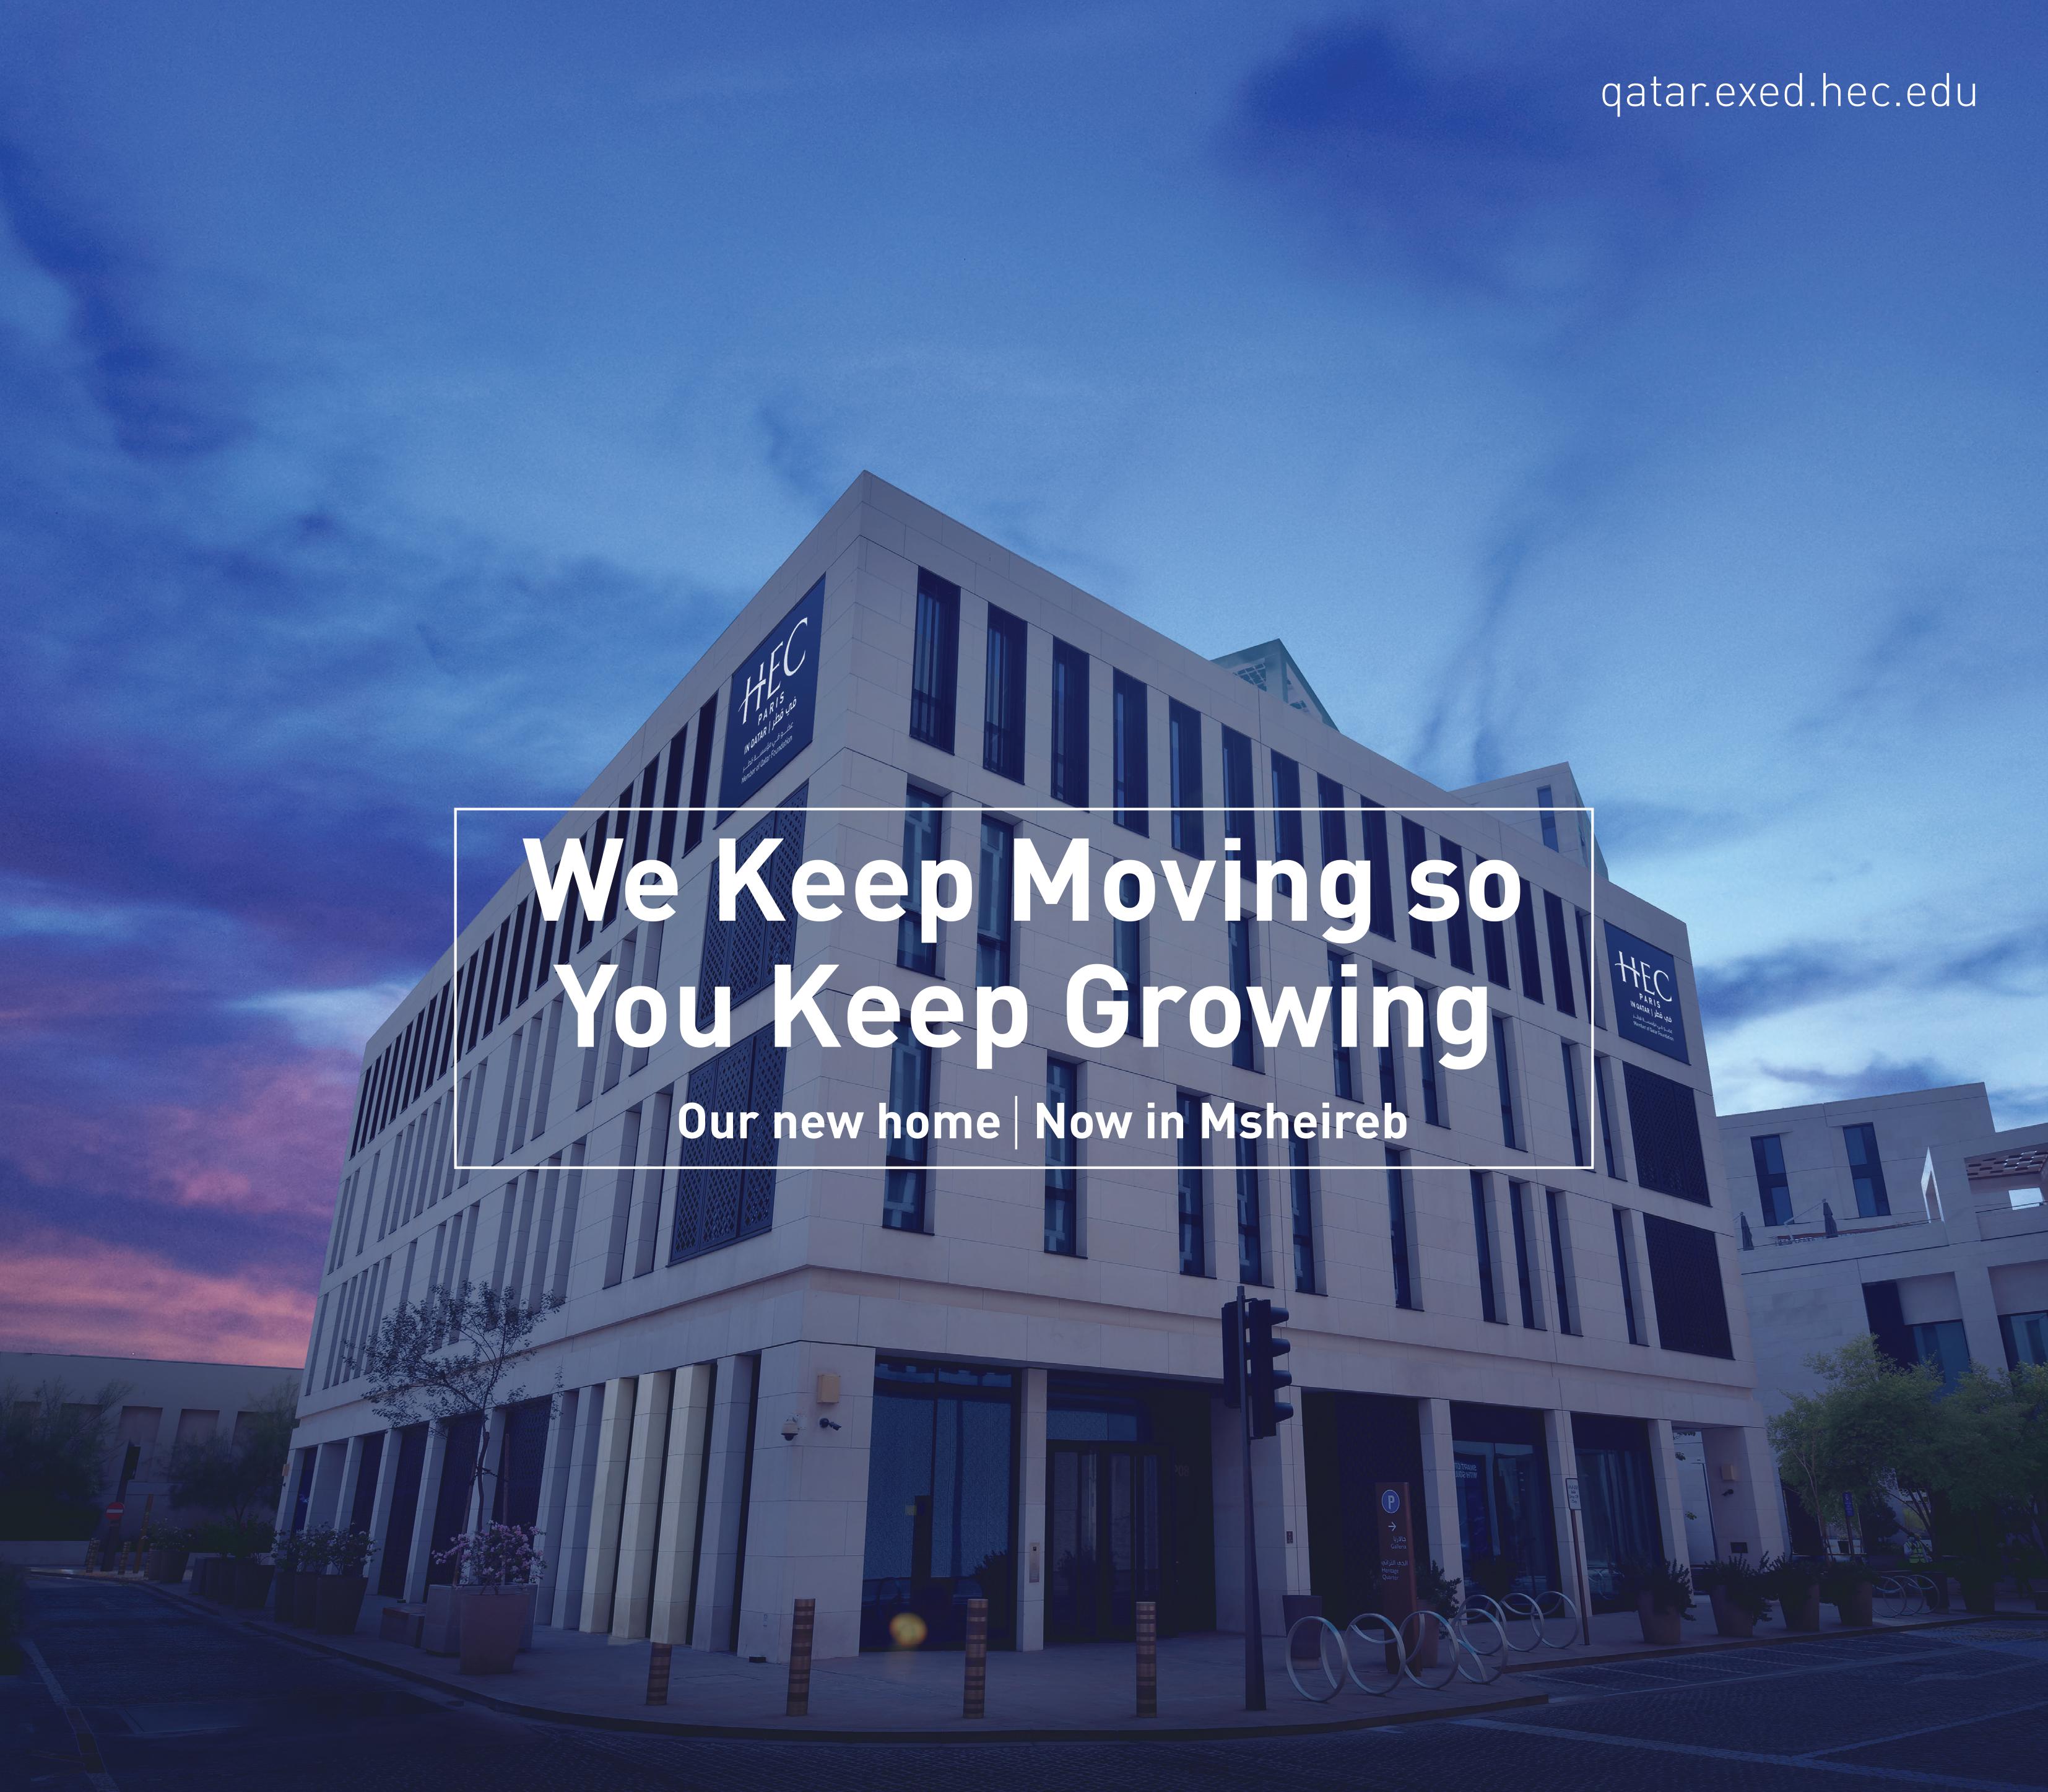 We Keep Moving. You Keep Growing. Join the Move